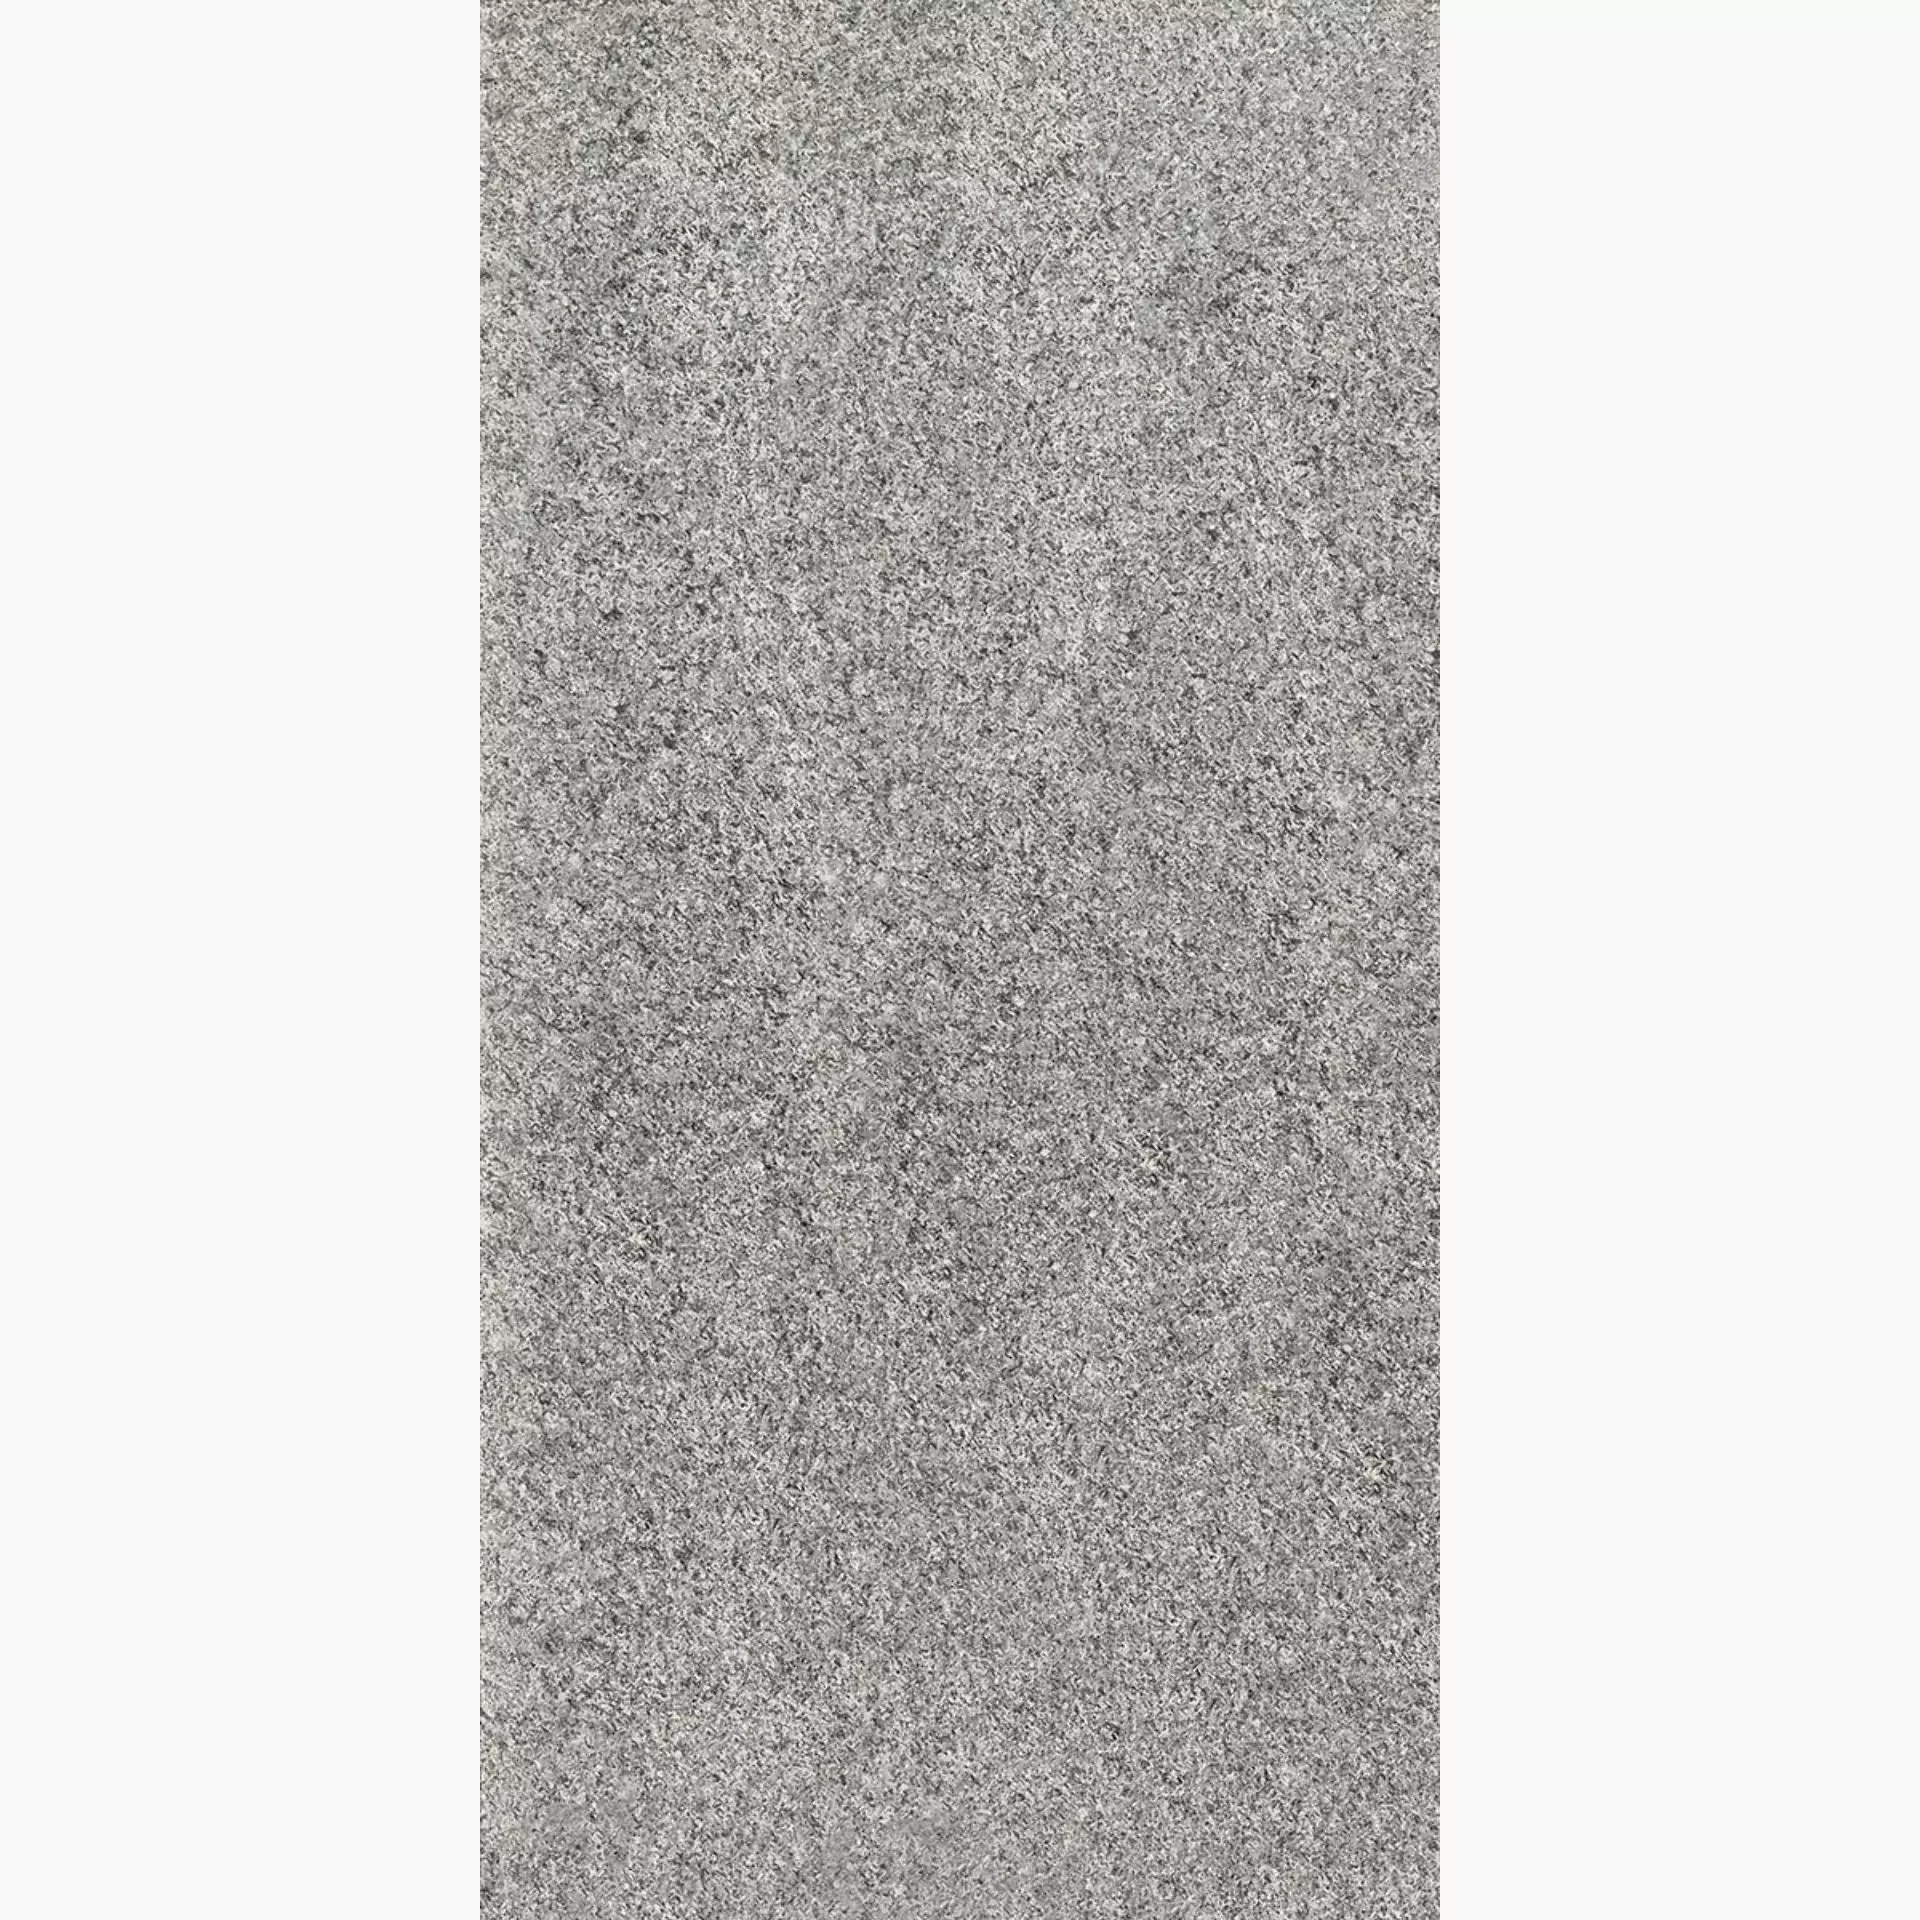 Keope Percorsi Frame Gneiss Grey Spazzolato 474A3249 30x60cm rectified 9mm